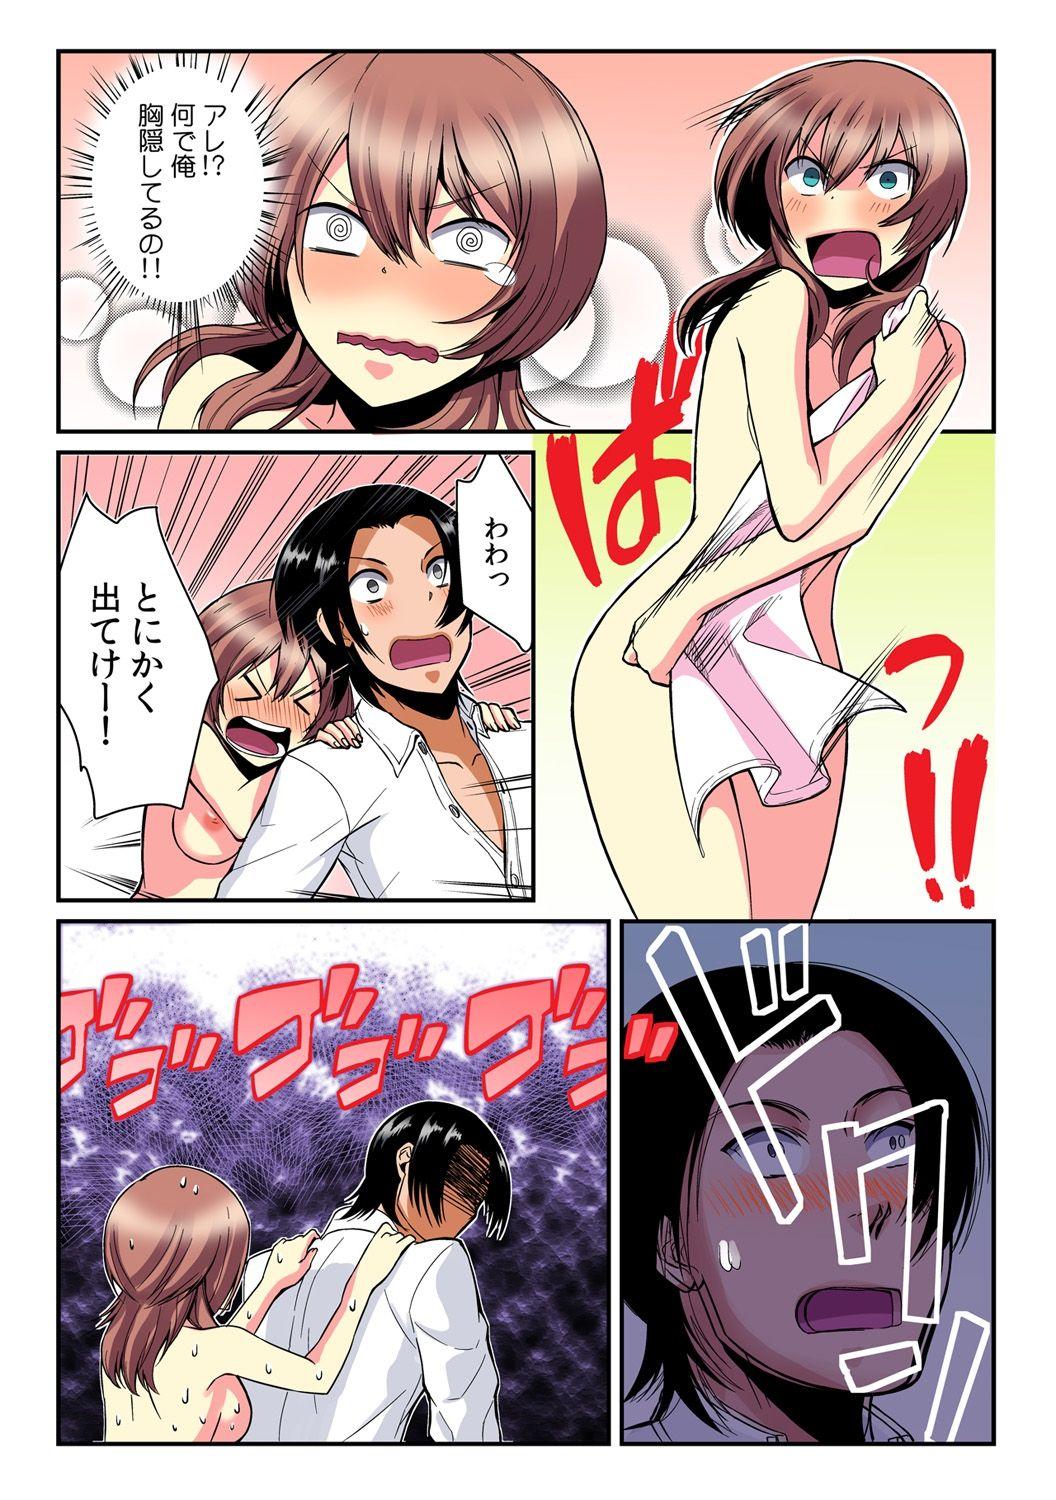 [Akagi Gijou / Akahige] I became a girl- and I definitely can't let anyone find out! (Full color) 1 27